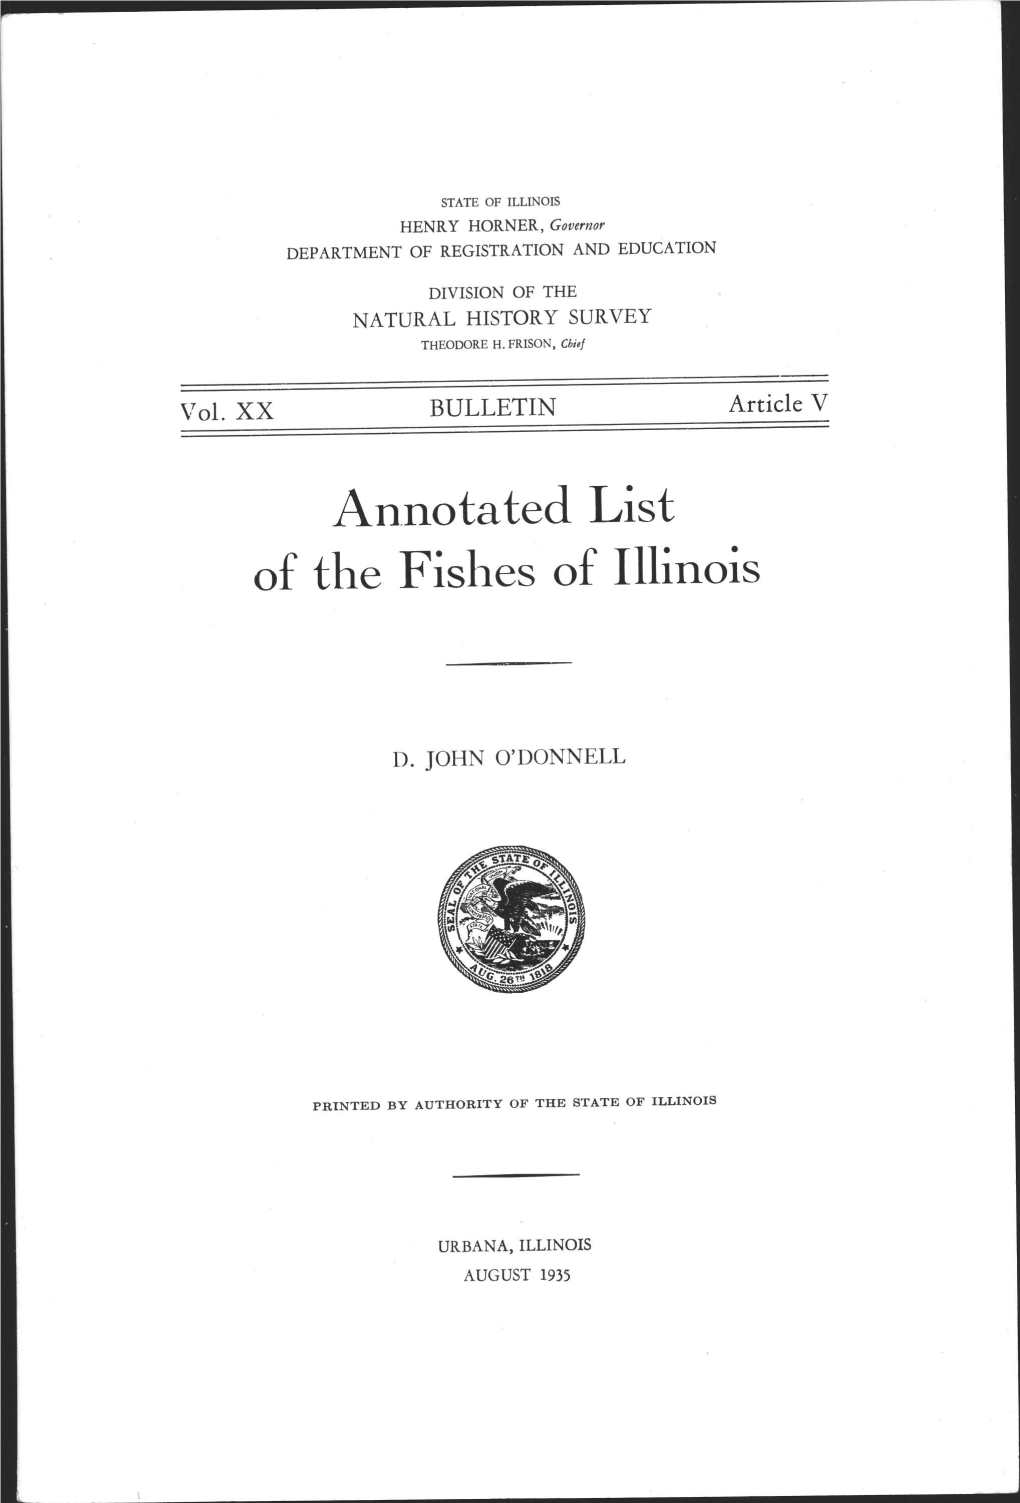 Annotated List of the Fishes of Illinois